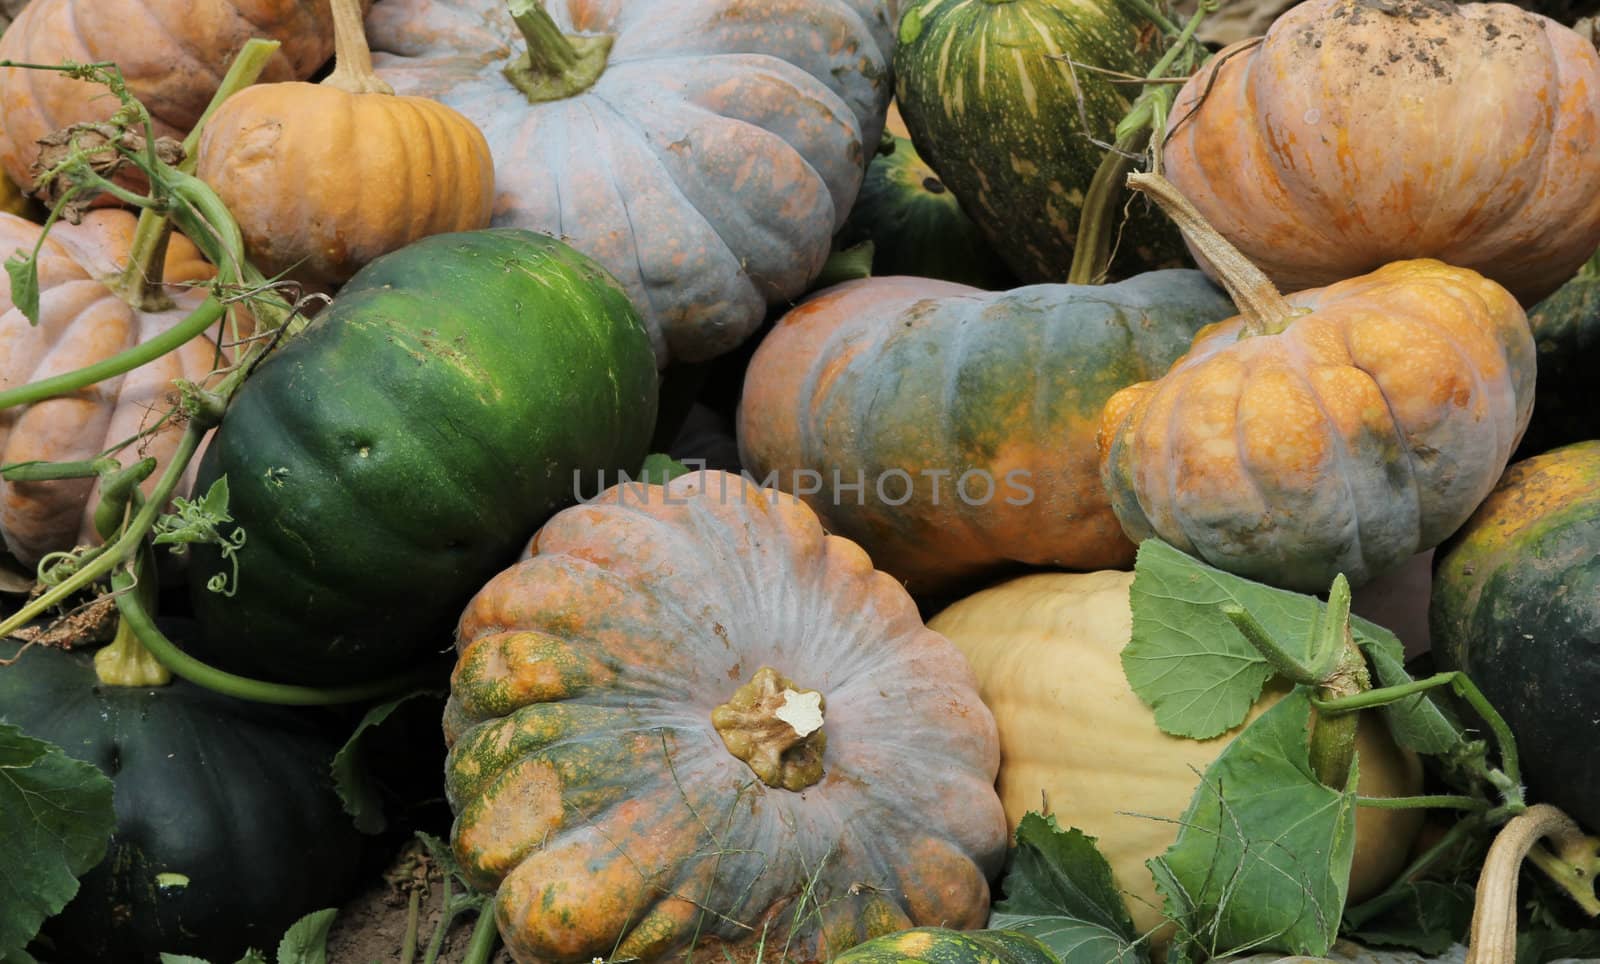 A pile of fresh pumpkins, green and yellow.